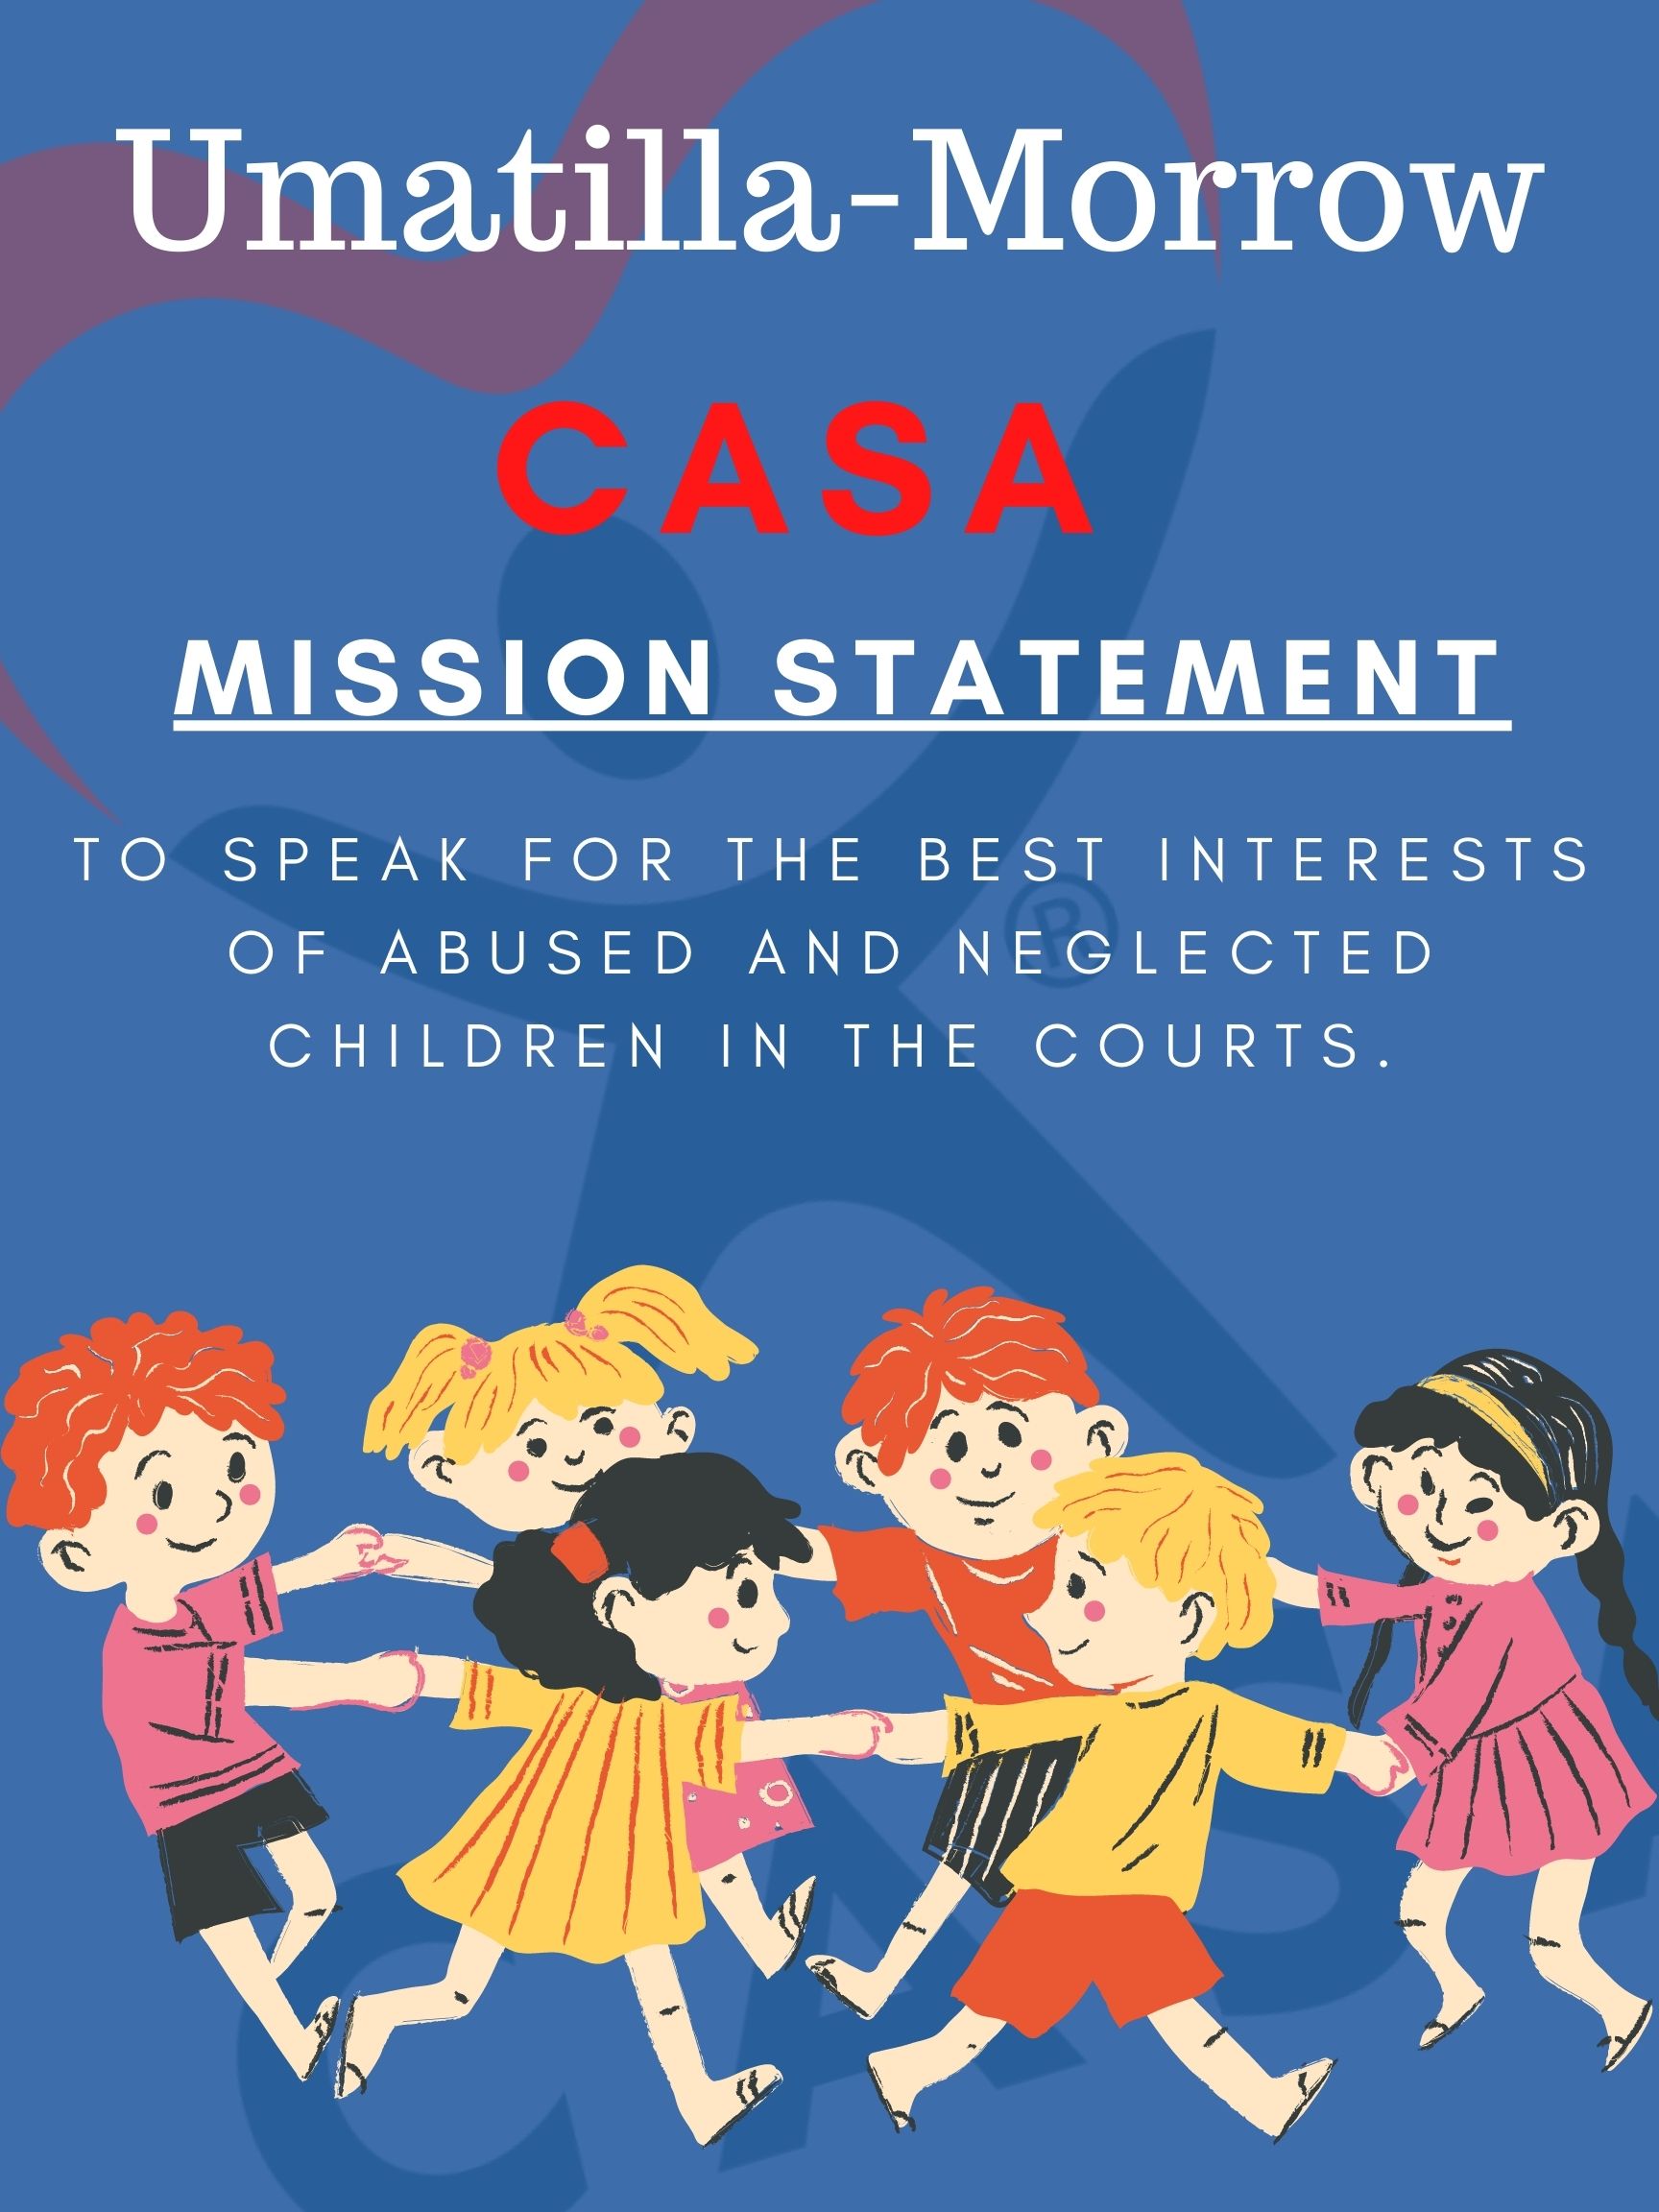 Umatilla morrow casa mission statement. To service the children in our communities who are abused and neglected.